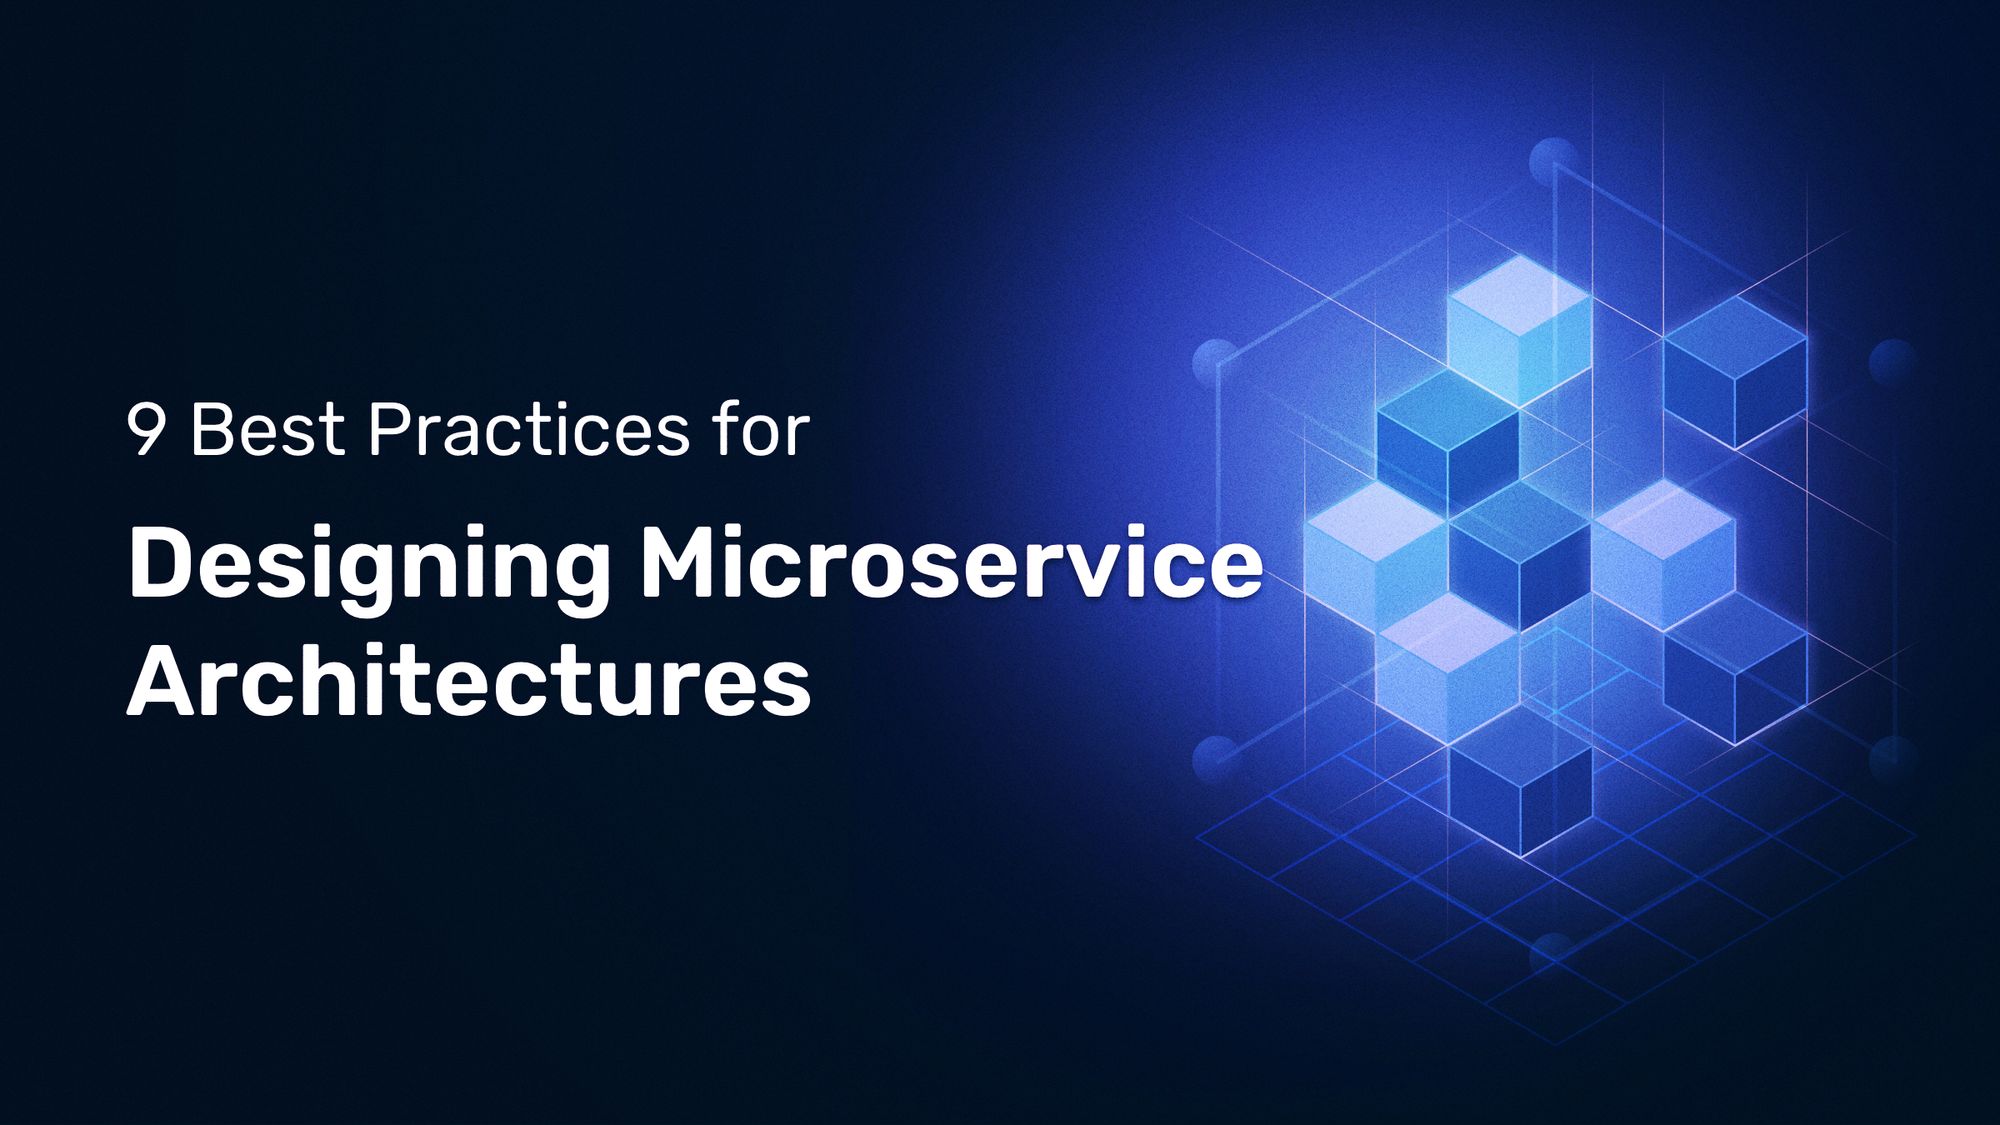 9 best practices for designing microservice architectures